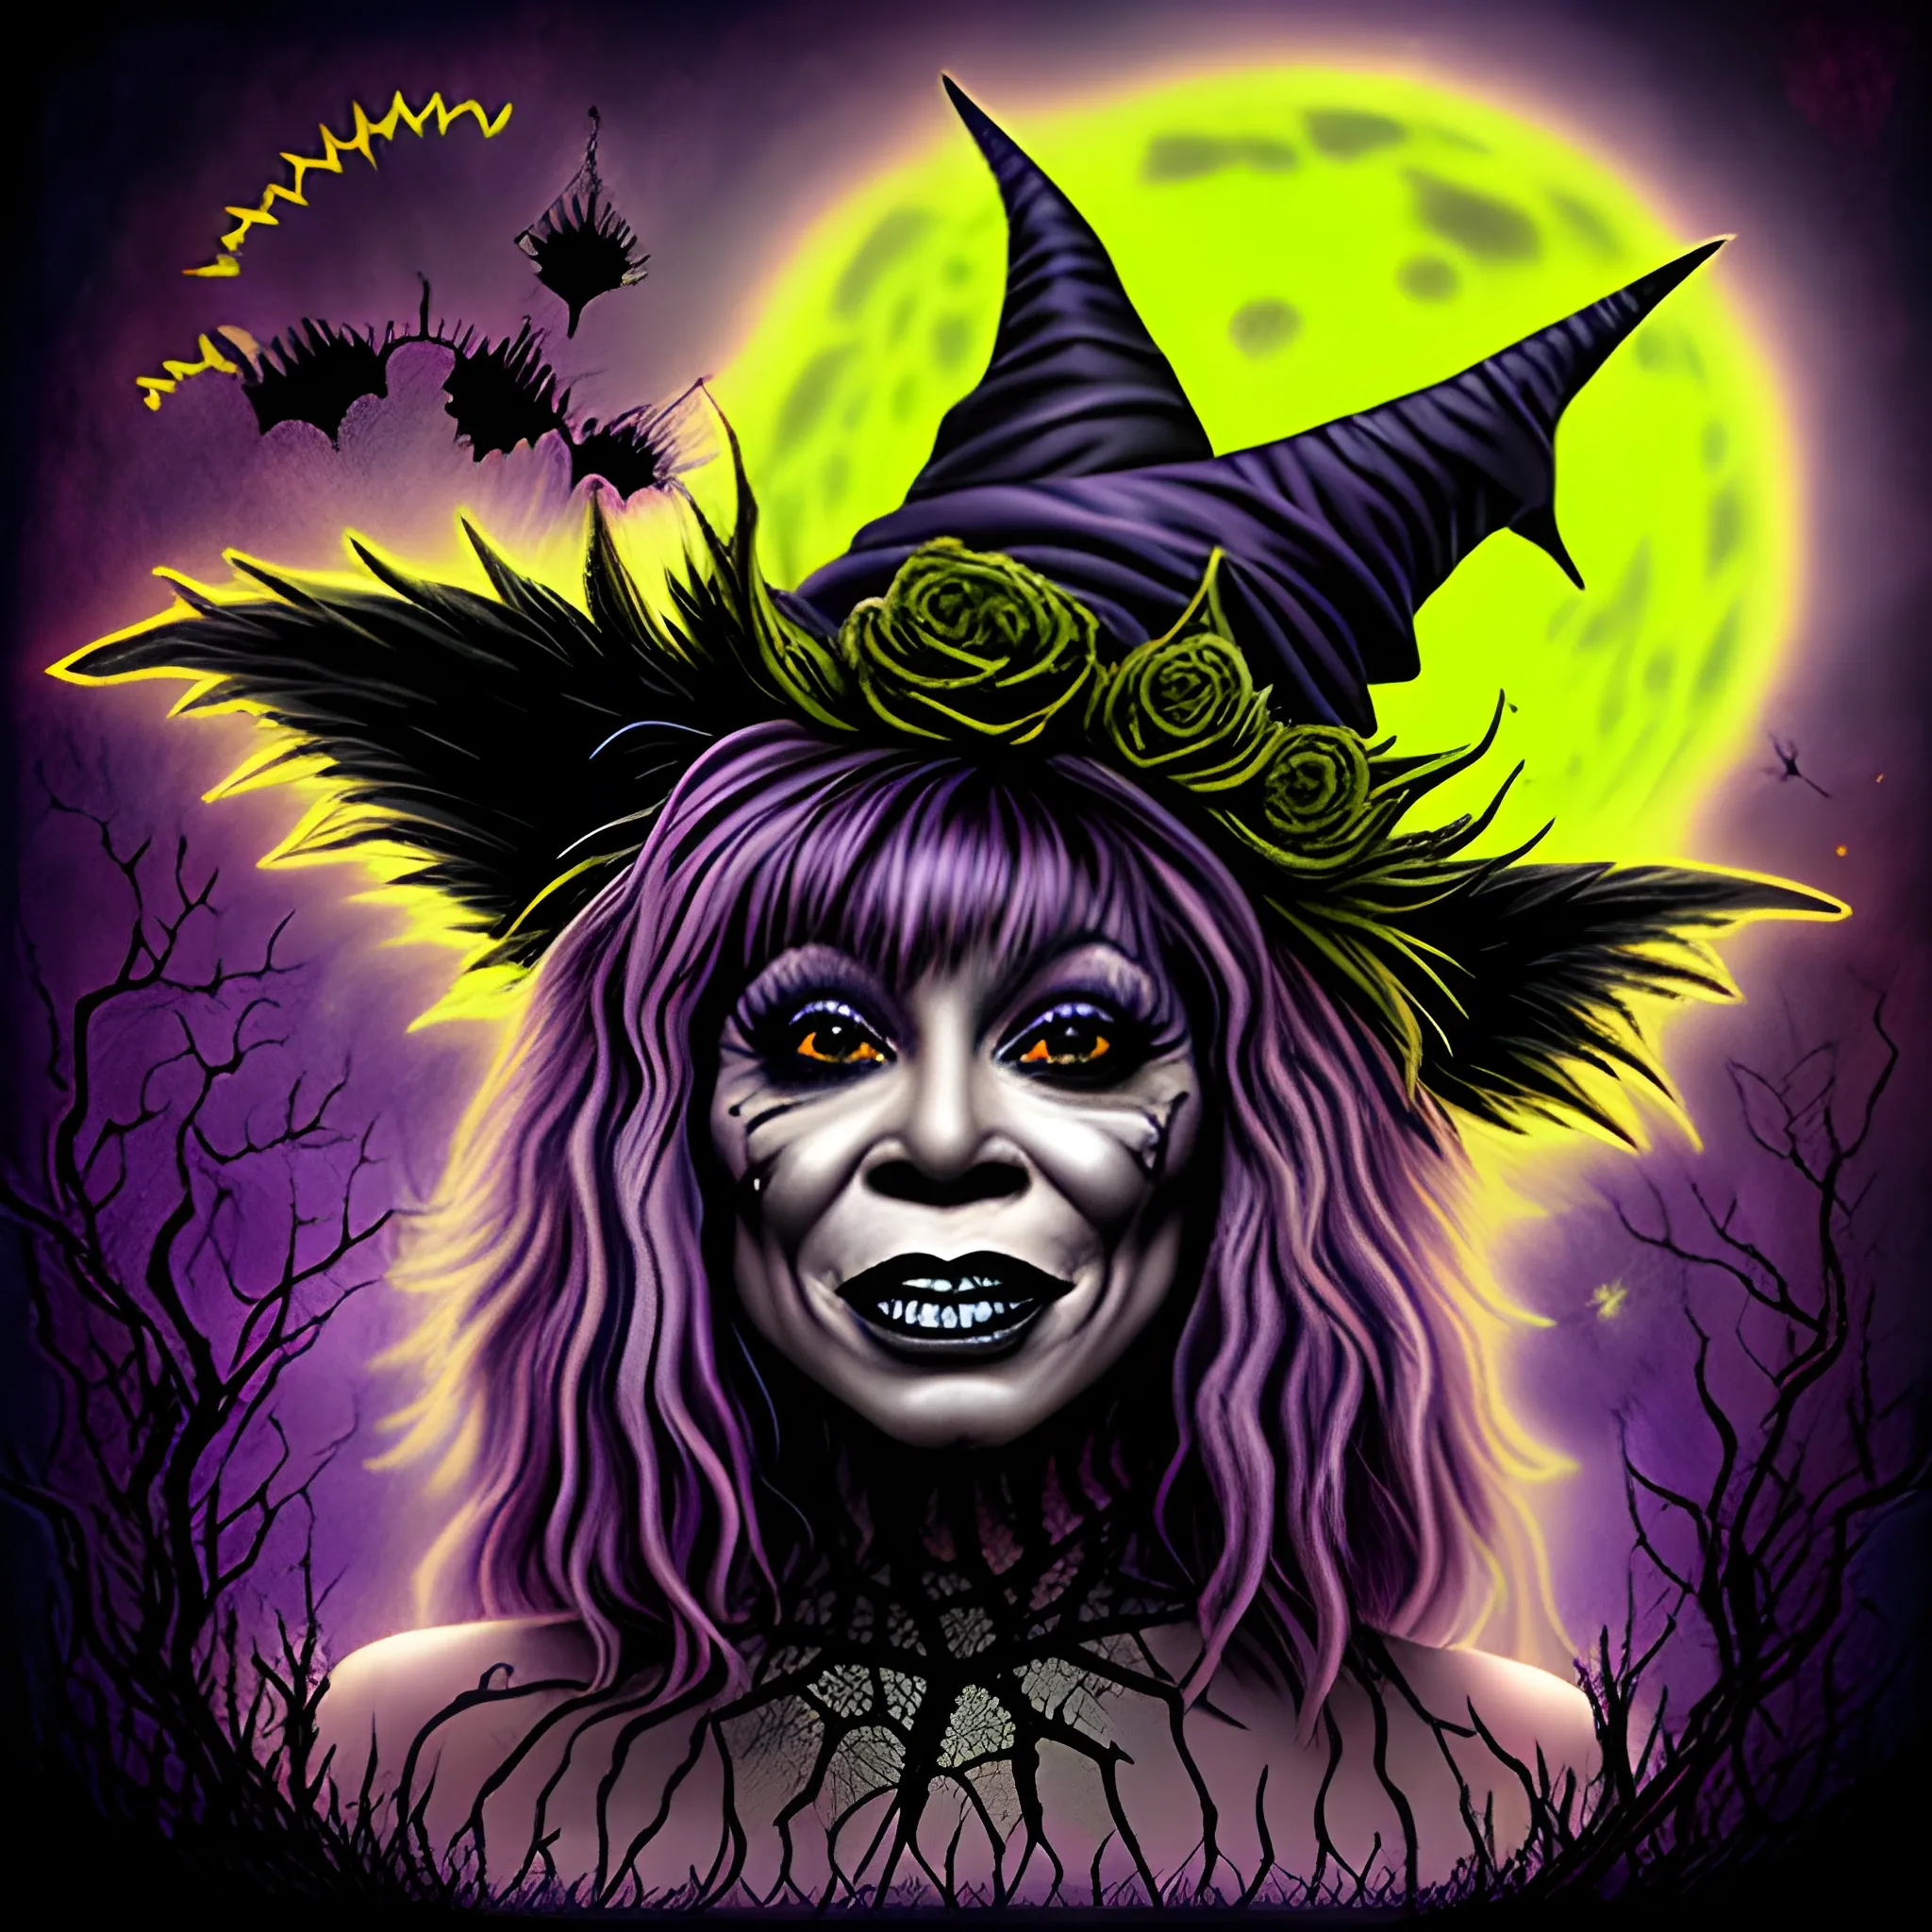 Tina Turner as a Halloween Witch, wearing a thorny witch hat adorned with thorns and black roses; Halloween, bats, full moon in a nebula sky, neon spray paint, acrylic paint, fantastical surrealist world, in the style of Stephen Gammell, extremely detailed Zentangle style, sick, gothic, eldritch, candles, neon grape purple, dayglo orange, chartreuse green, Halloween